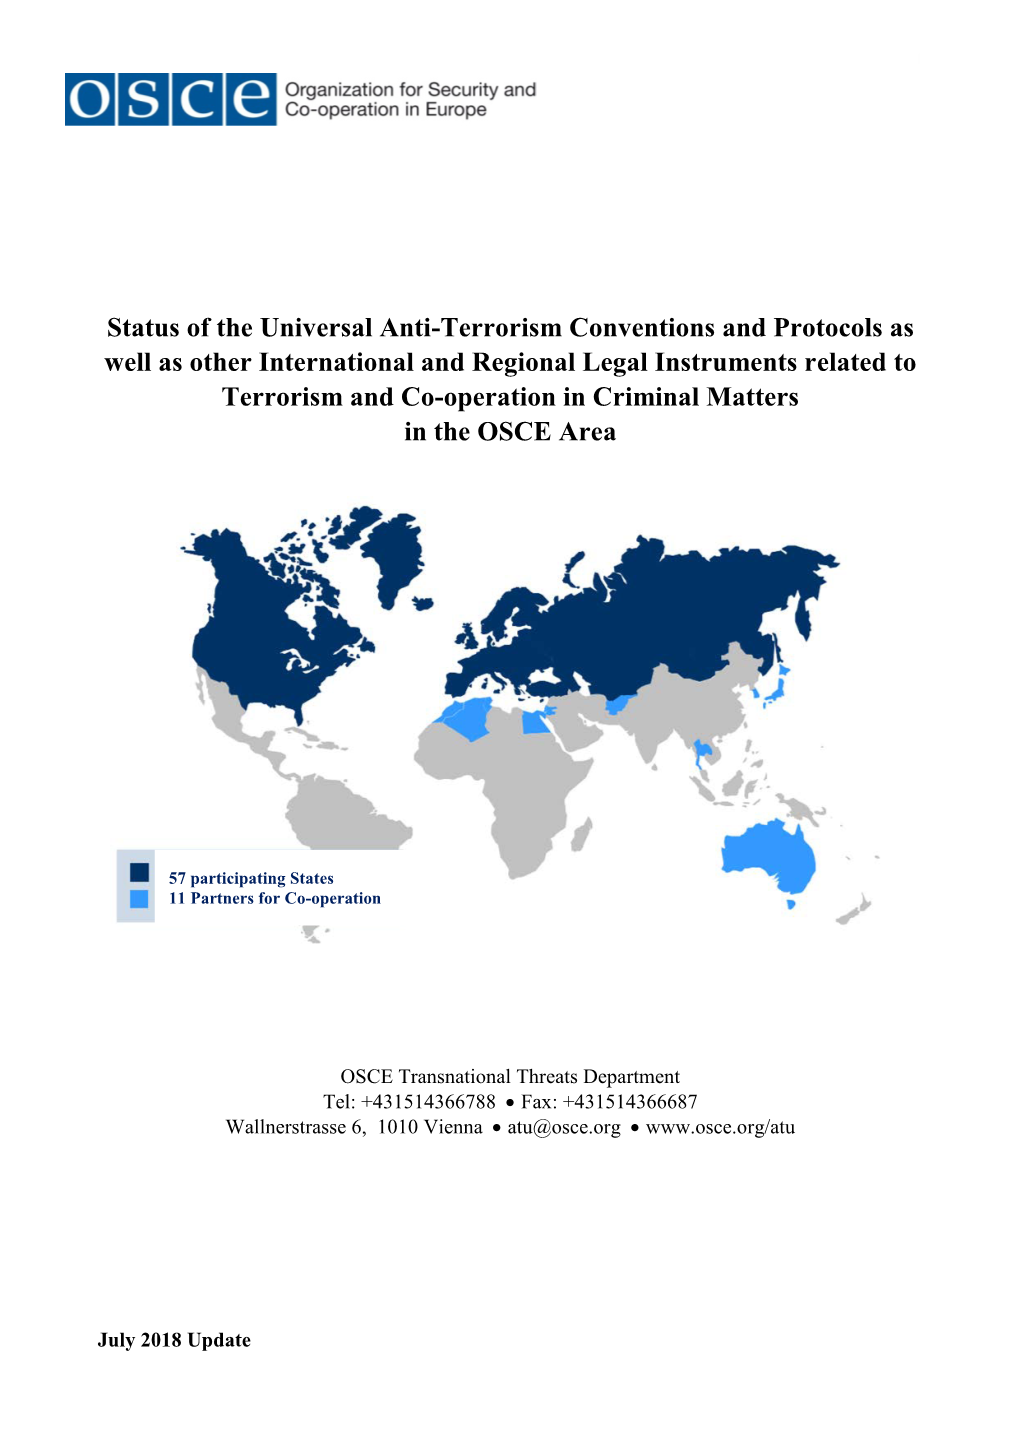 Status of the Universal Anti-Terrorism Conventions and Protocols As Well